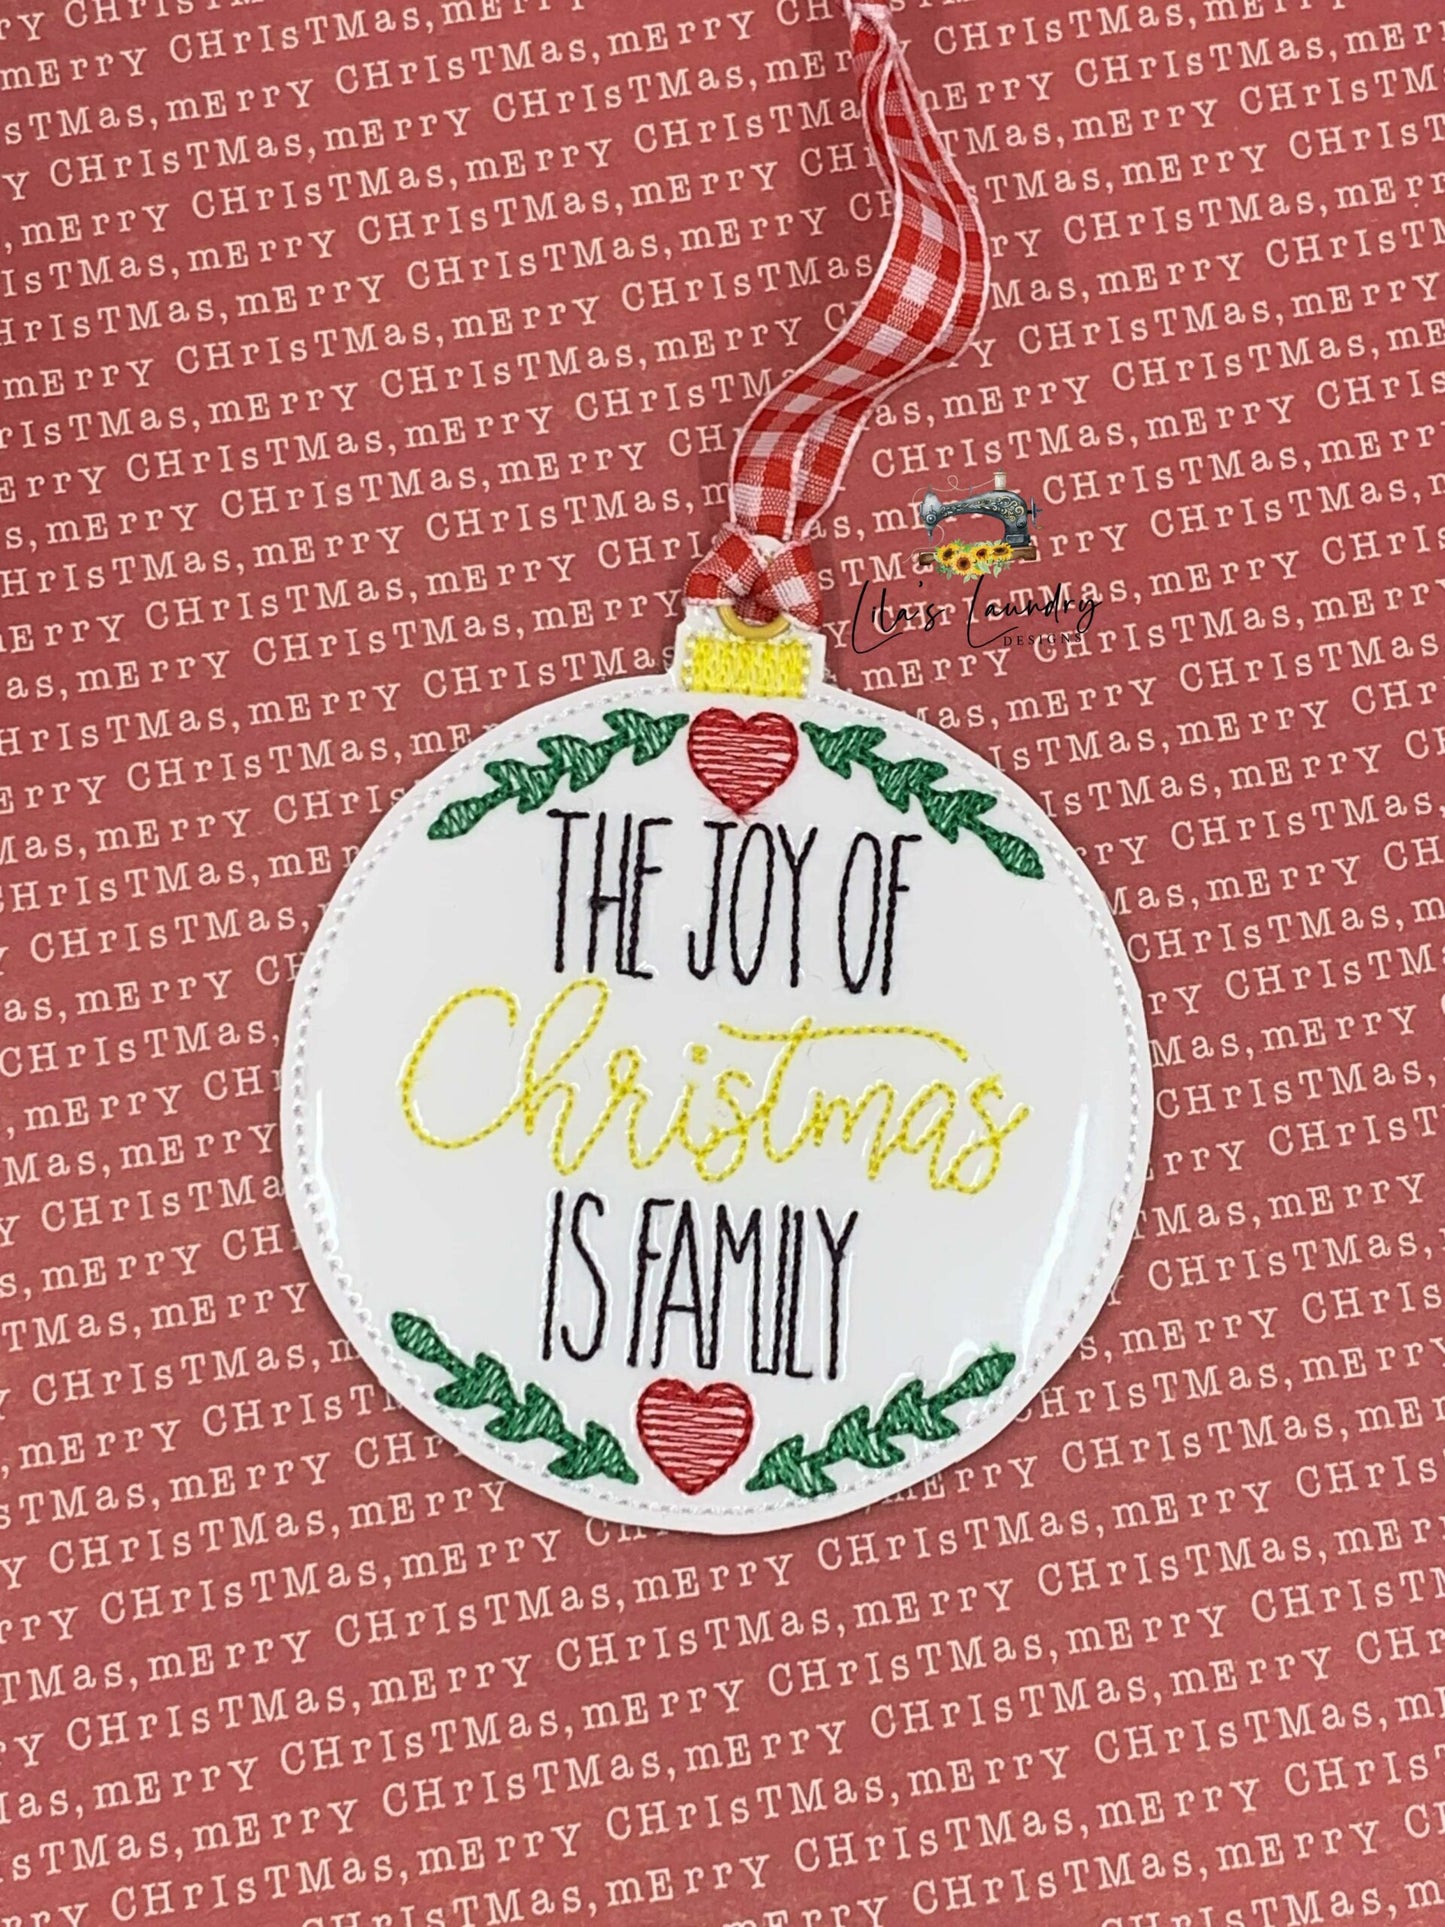 Joy of Christmas is Family Ornament - Digital File - Embroidery Design